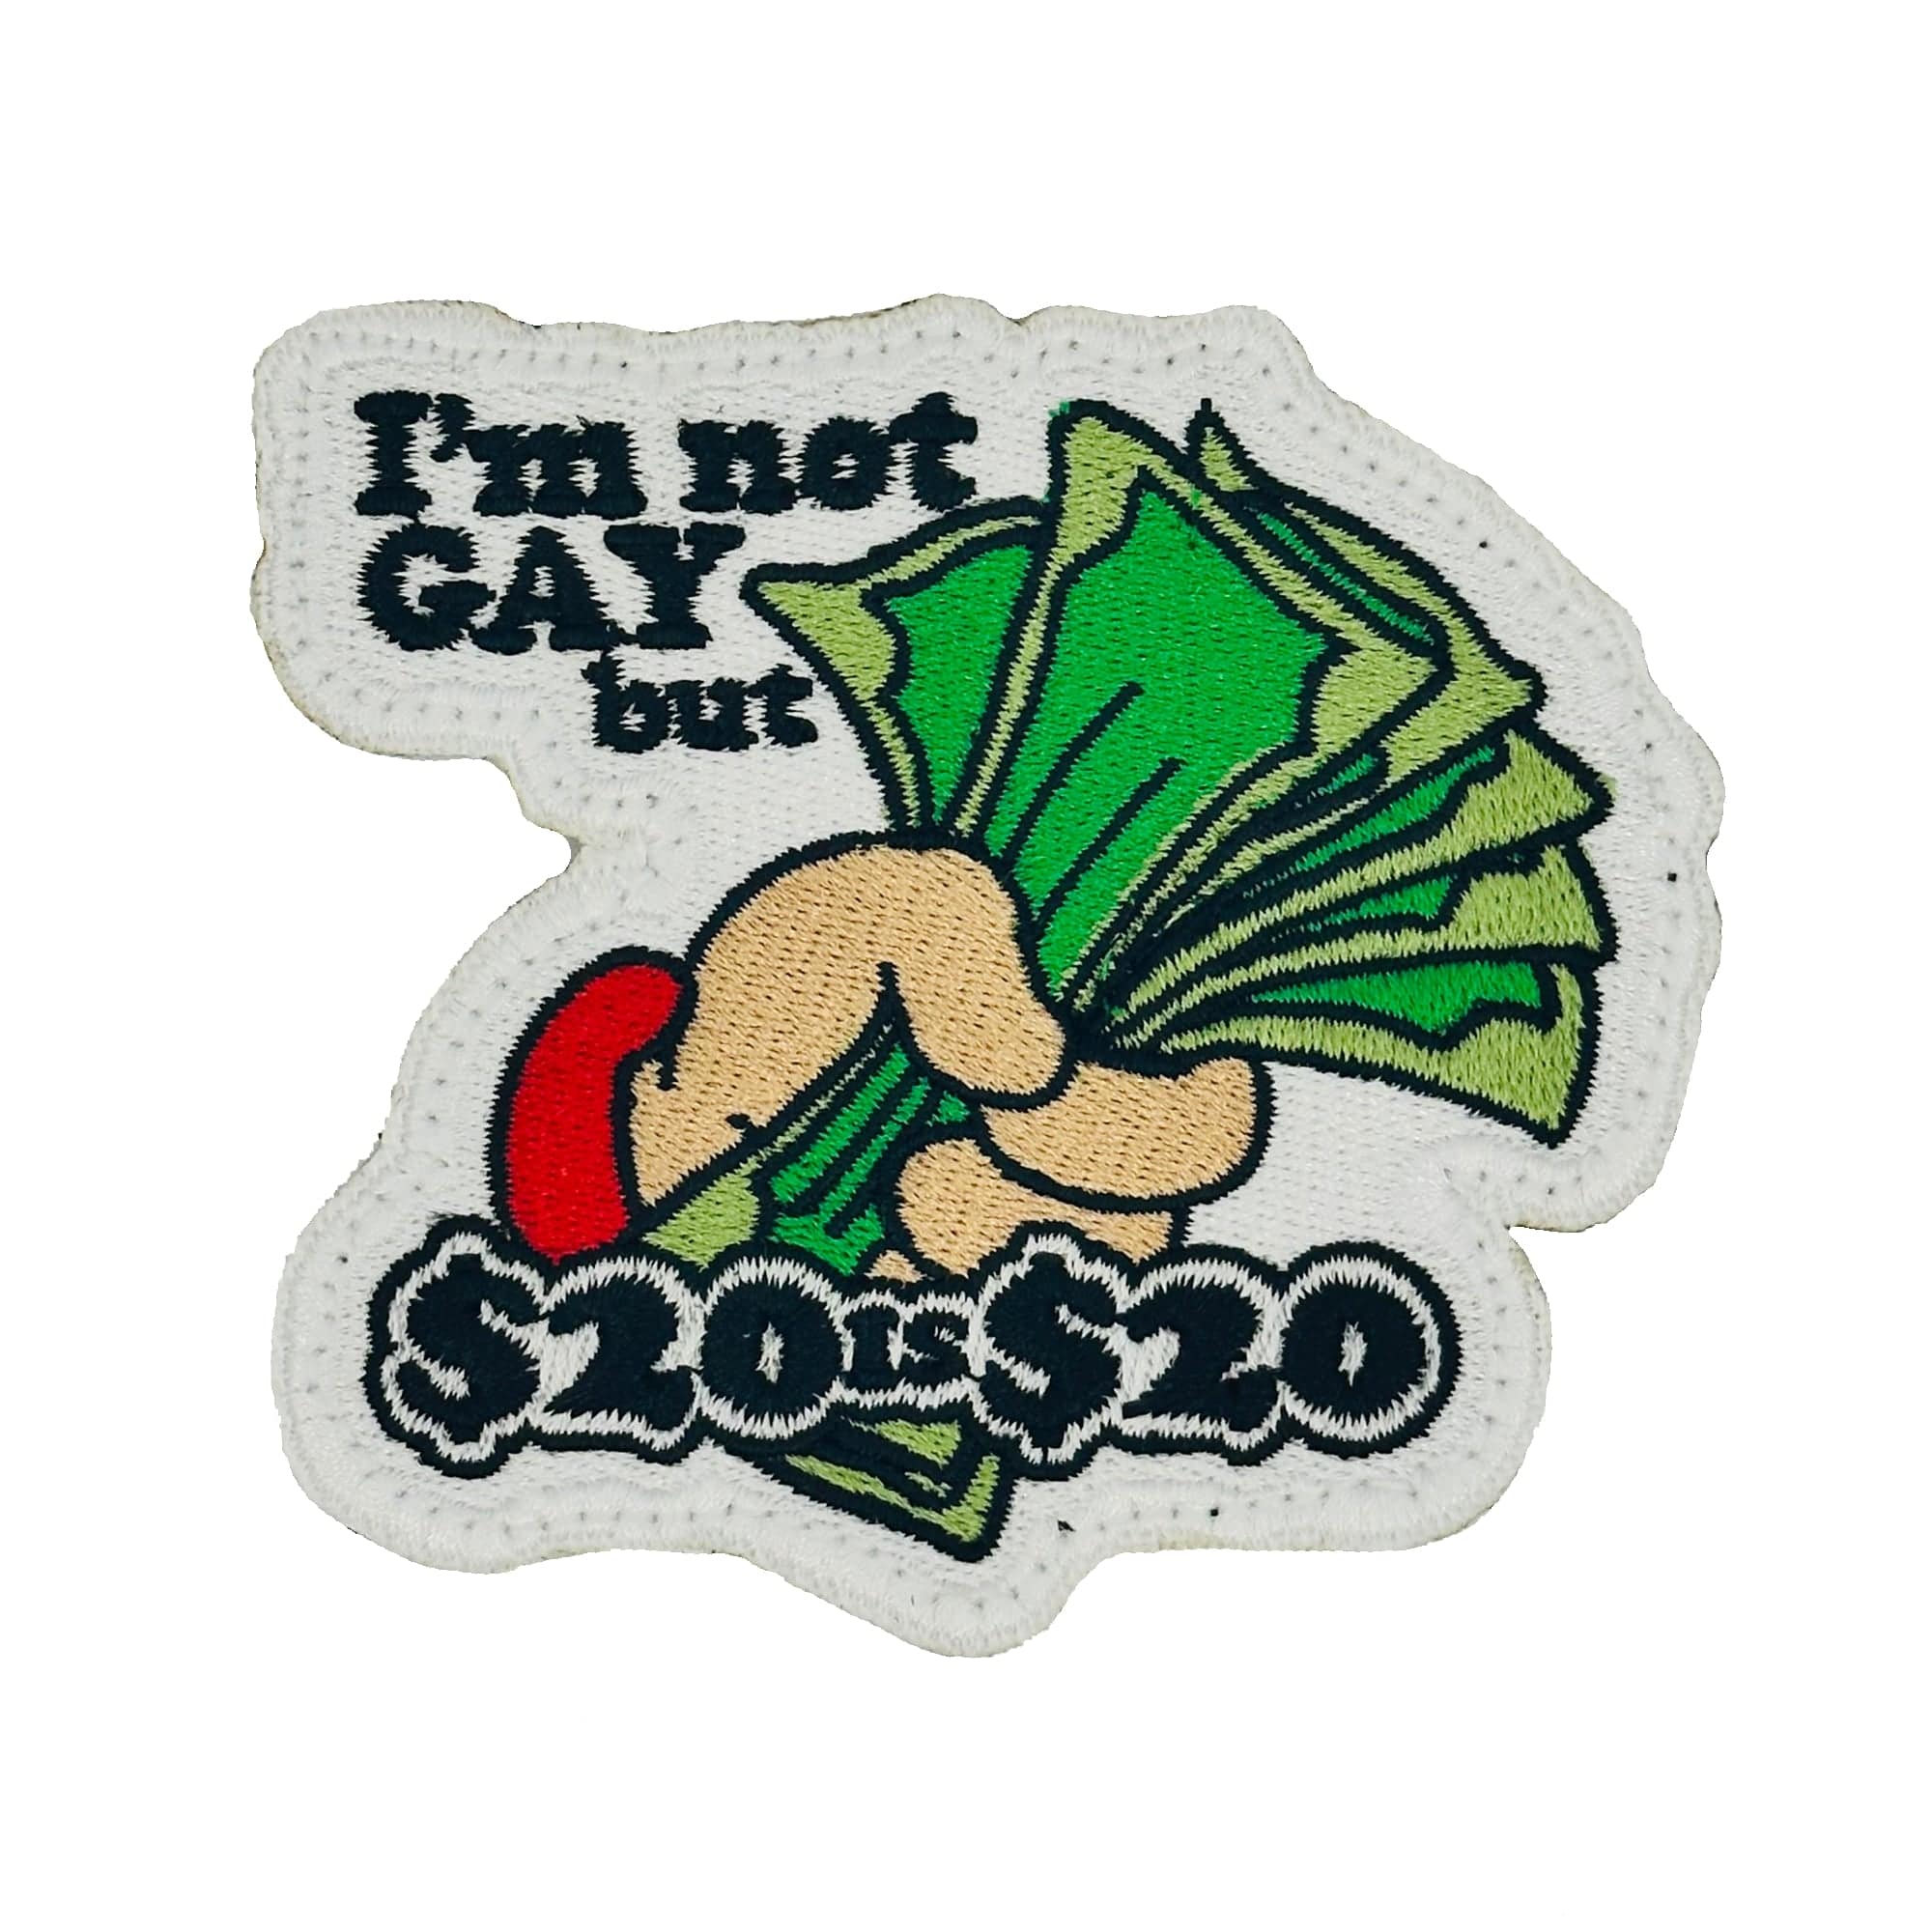 Tactical Gear Junkie Patches I'm Not Gay But $20 is $20 - 3.25" Laser Cut Patch